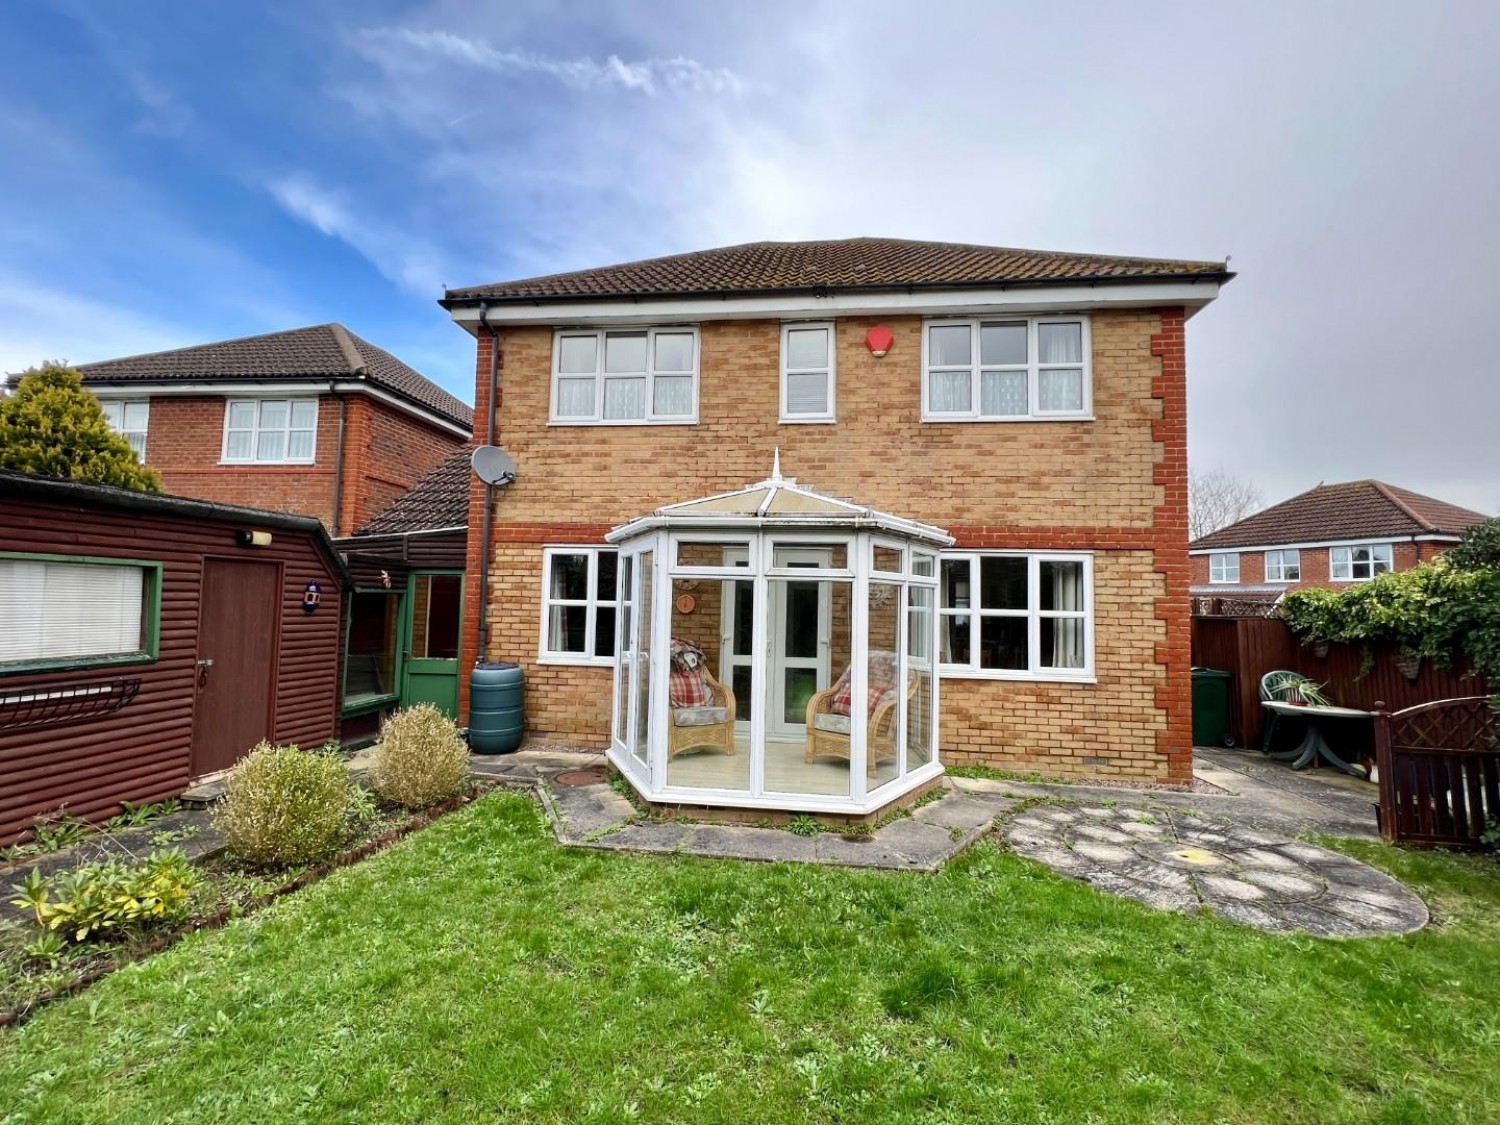 Mount View, Chain free detached home